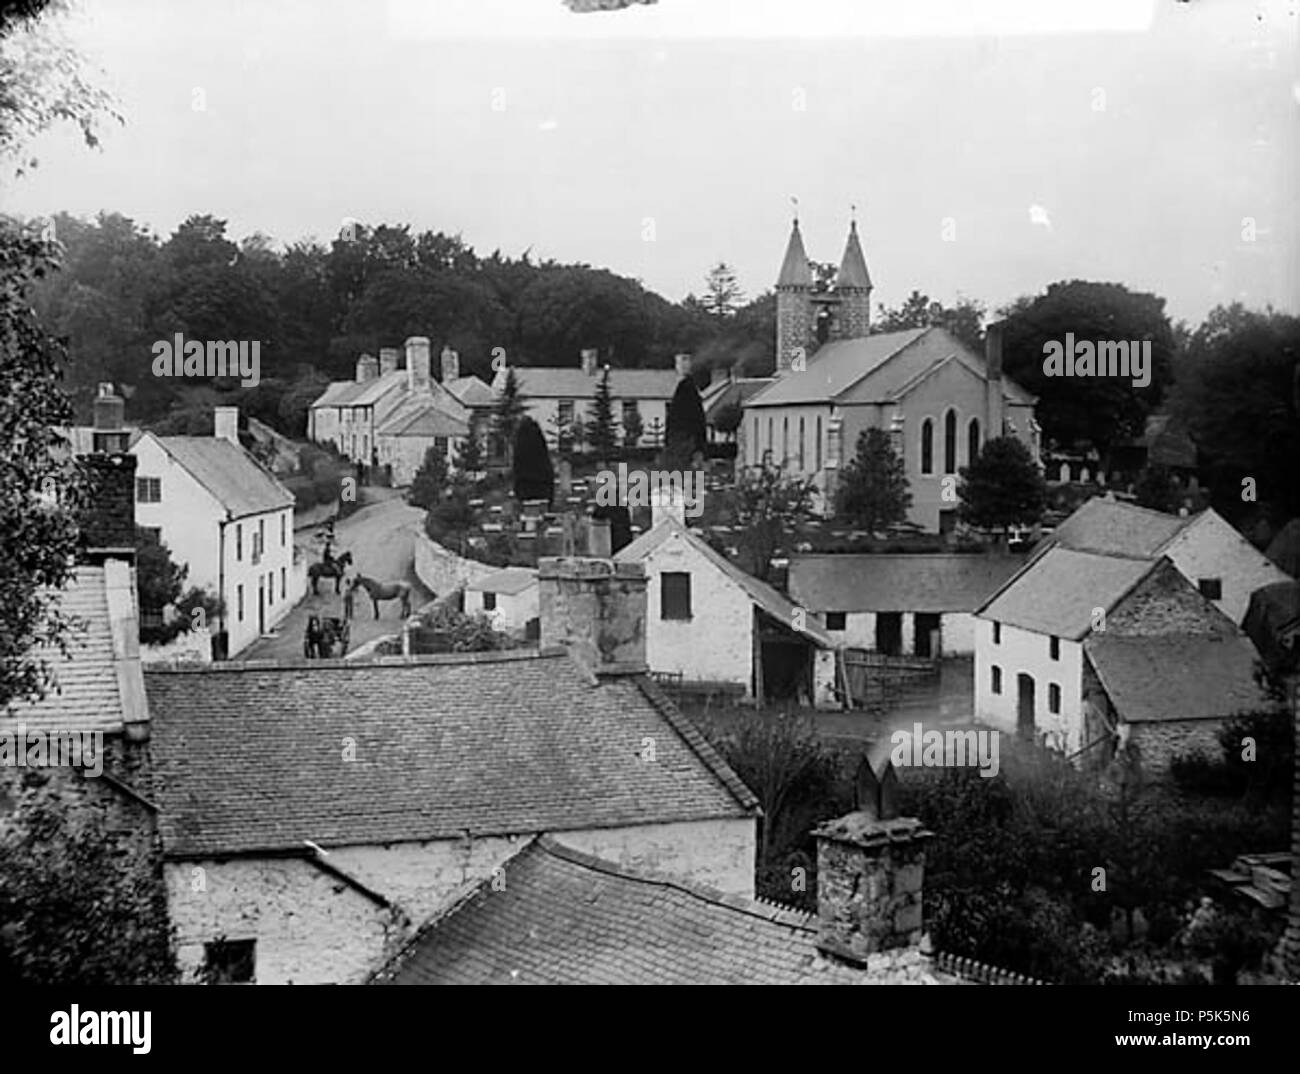 [A view of Betws-yn-Rhos from Cae'r Person] [graphic].. 1 negative : glass, dry plate, b&w ; 16.5 x 21.5 cm. circa 1885. Thomas, John, 47 A view of Betws-yn-Rhos from Cae'r Person NLW3361268 Stock Photo